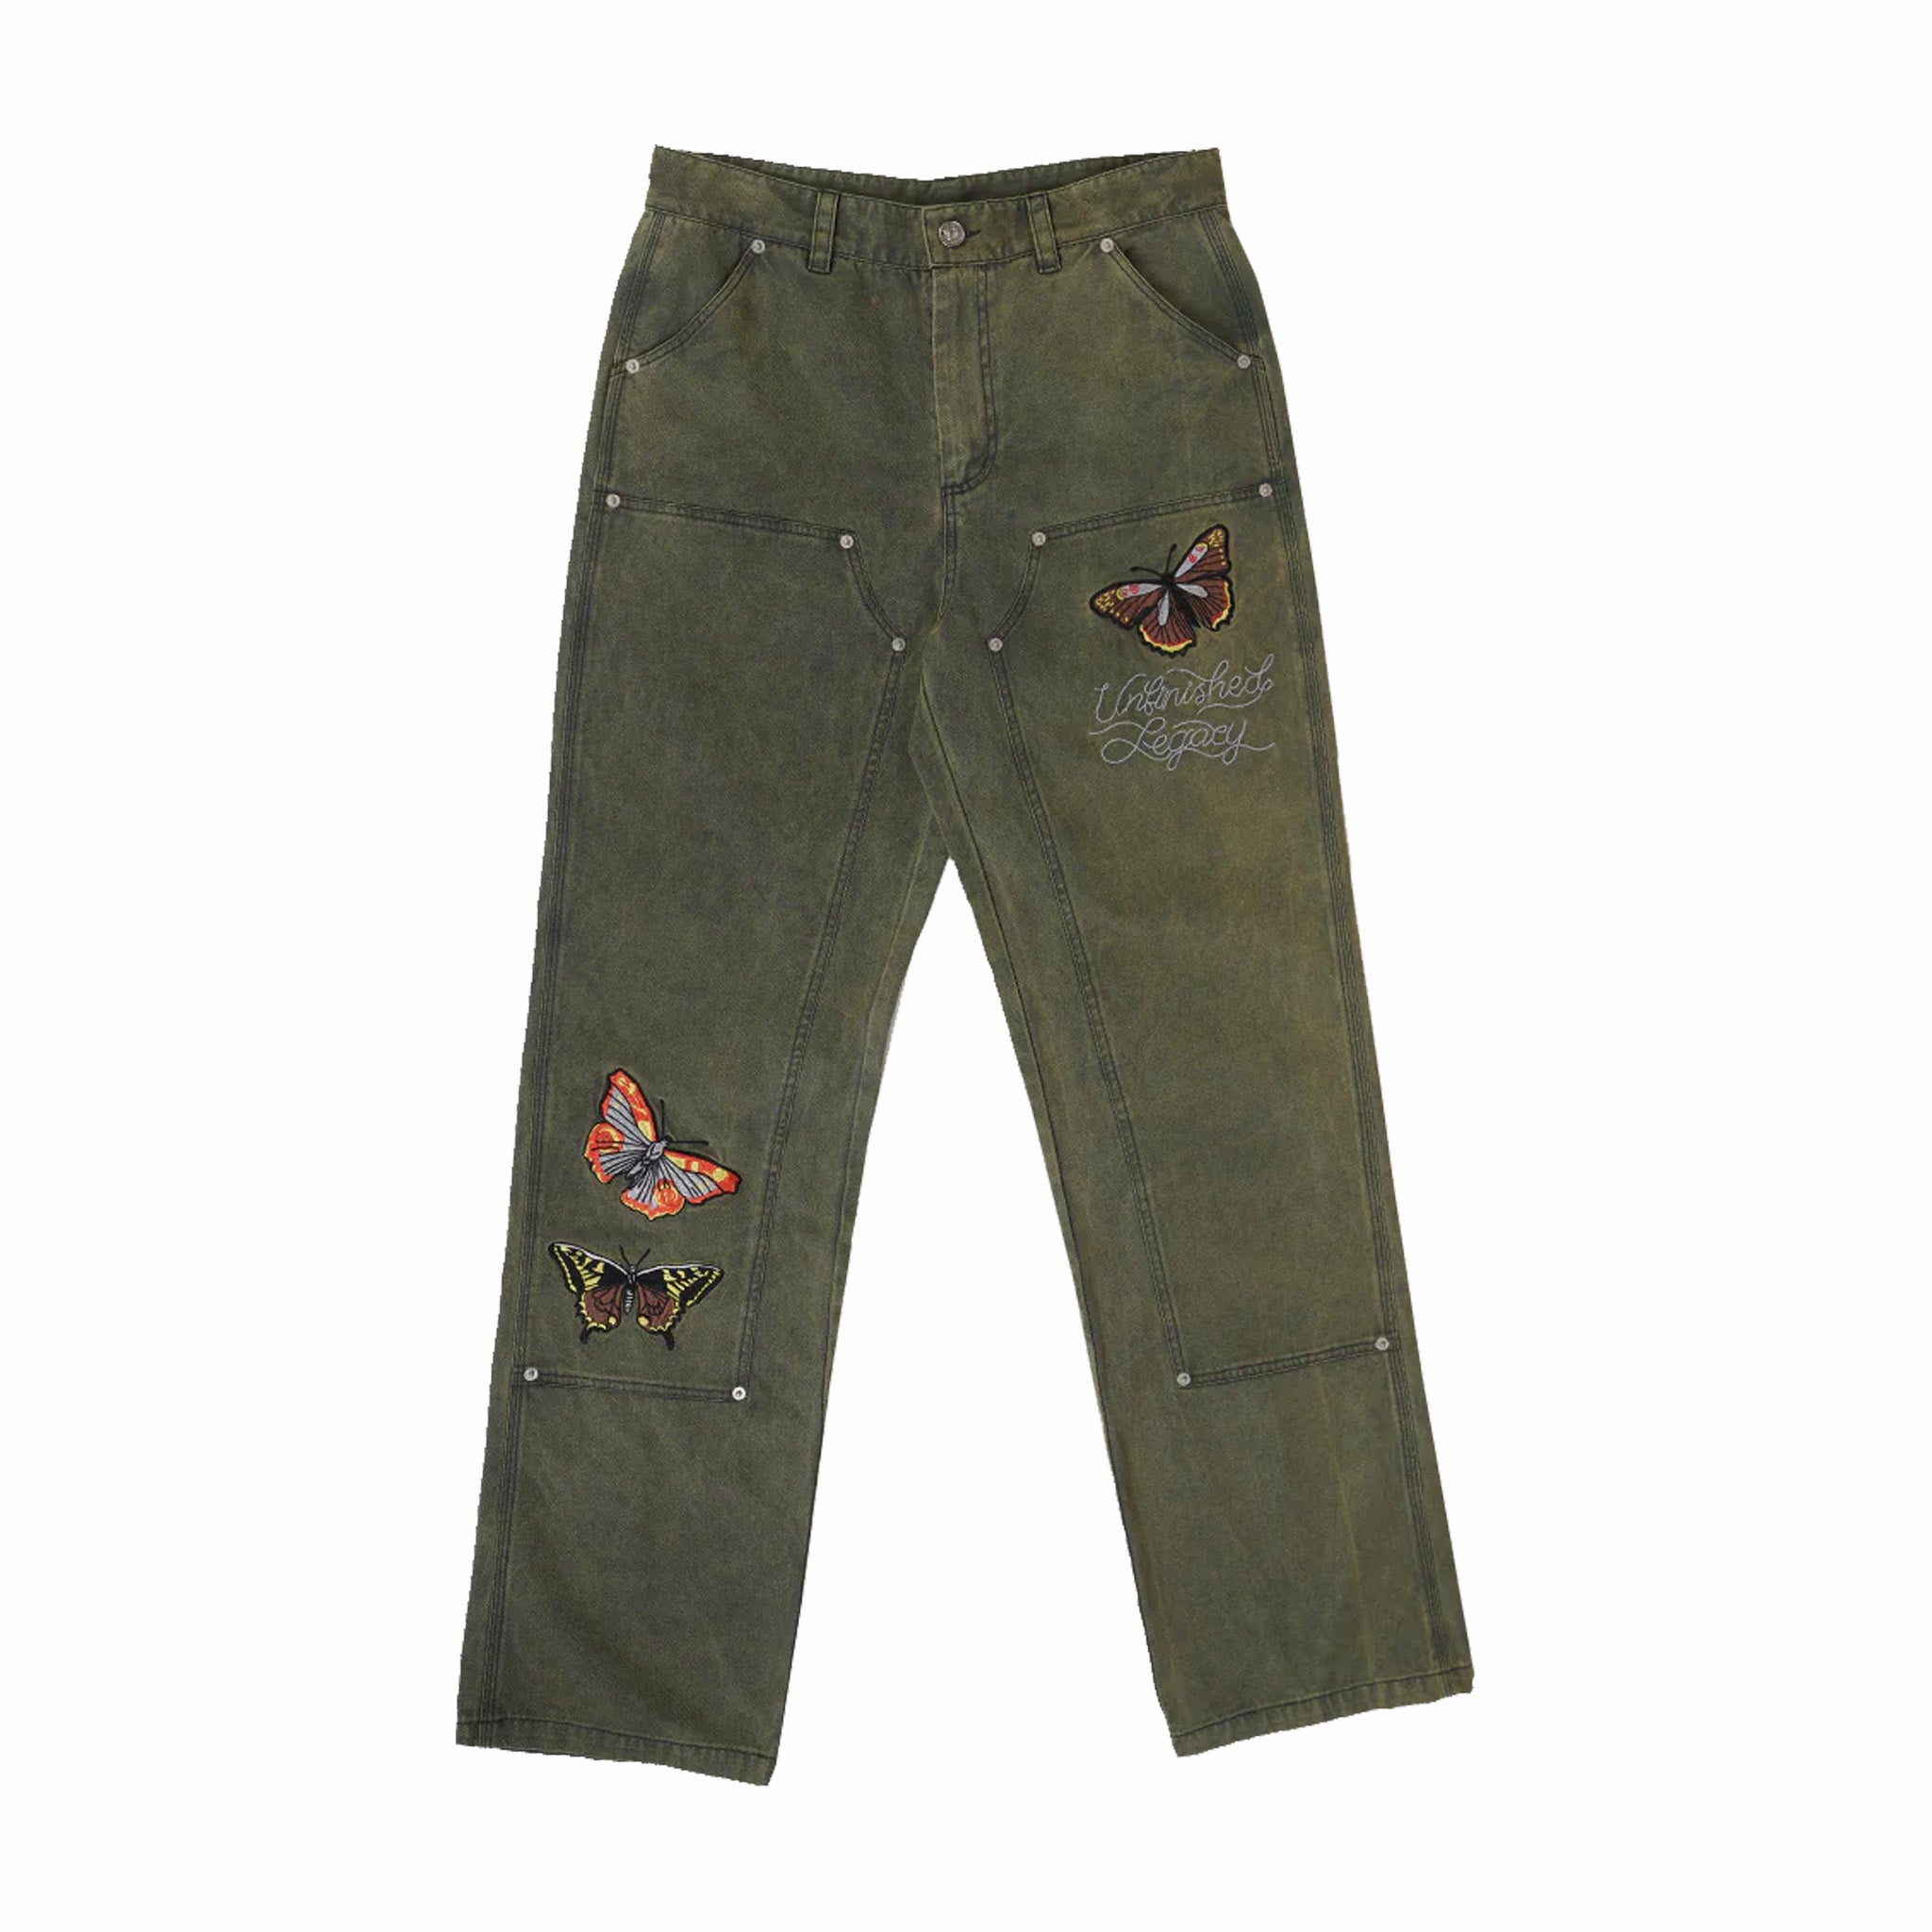 Unfinished Legacy Epidote Double Knee Work Pant (Green) - August Shop